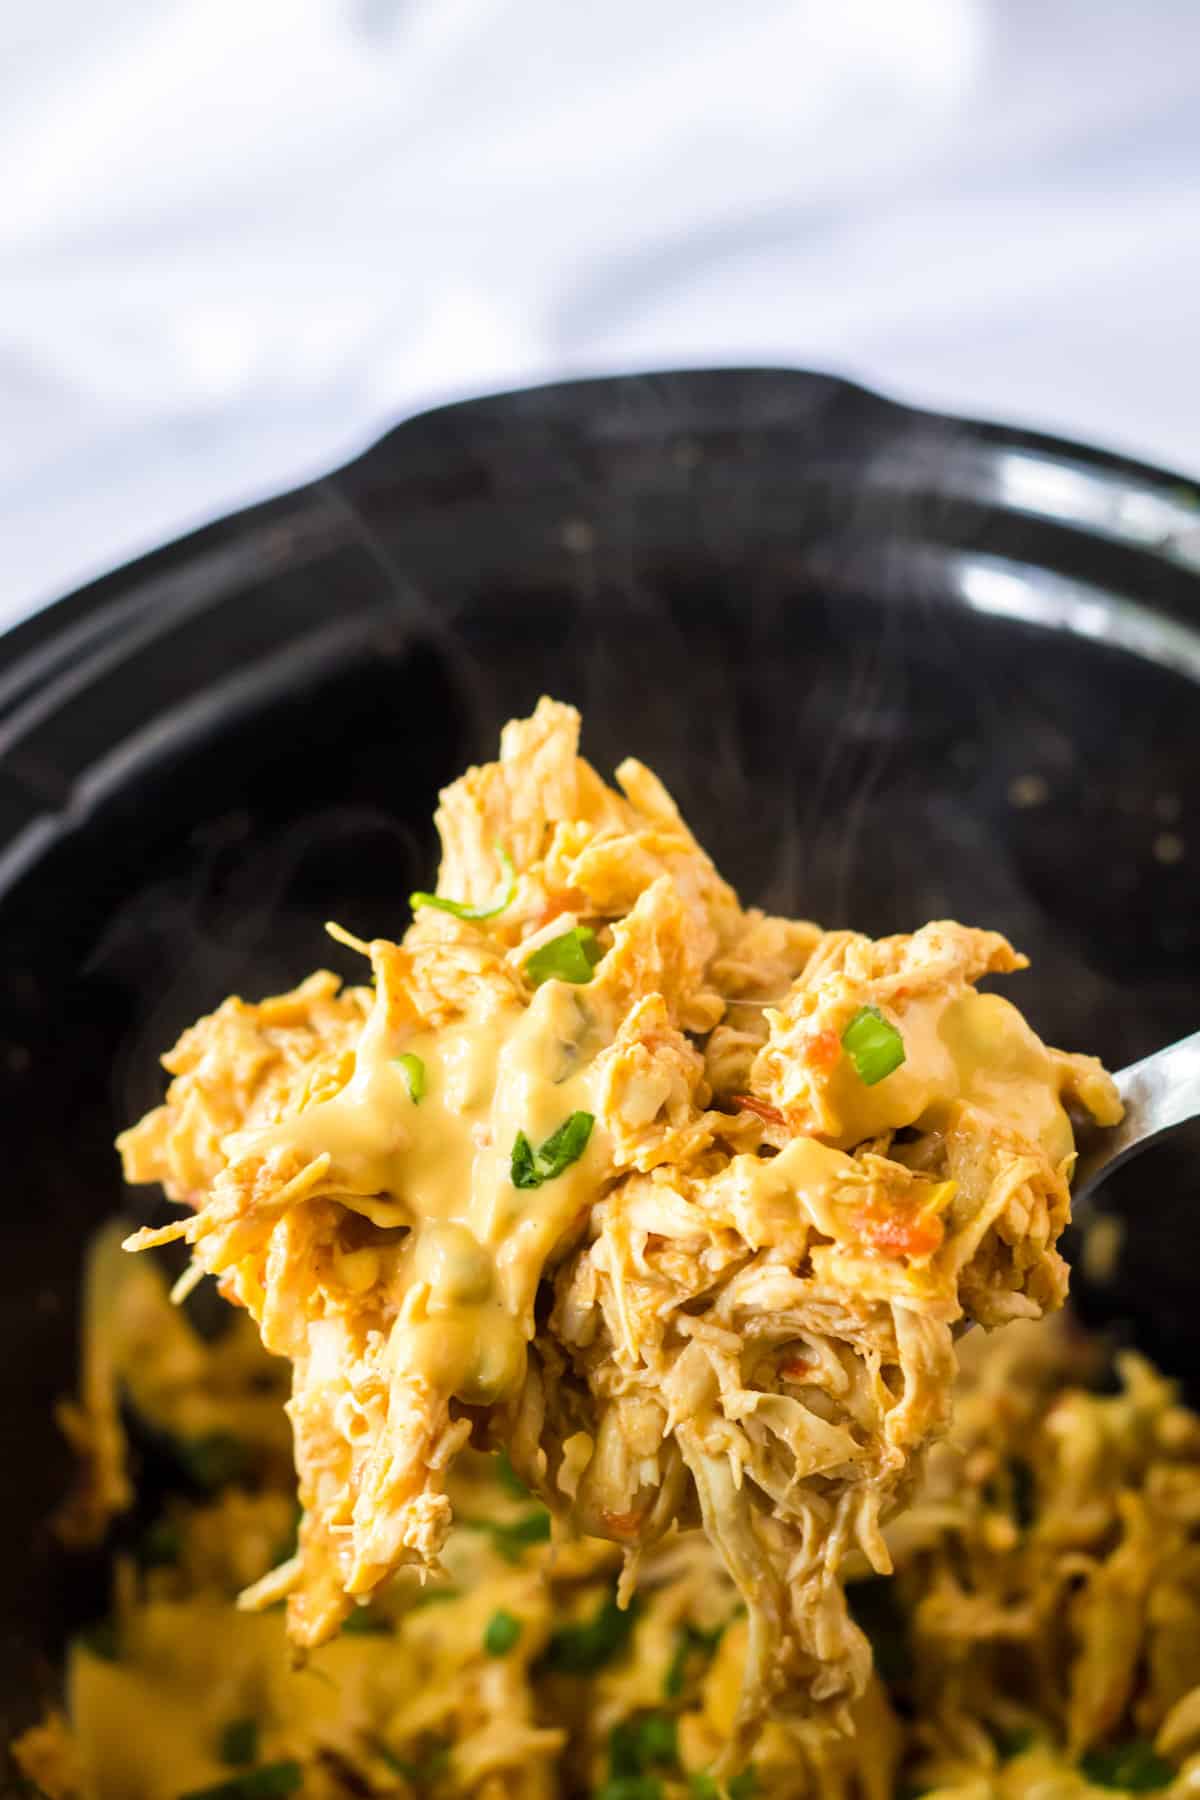 Spoon scooping queso chicken out of the slow cooker.